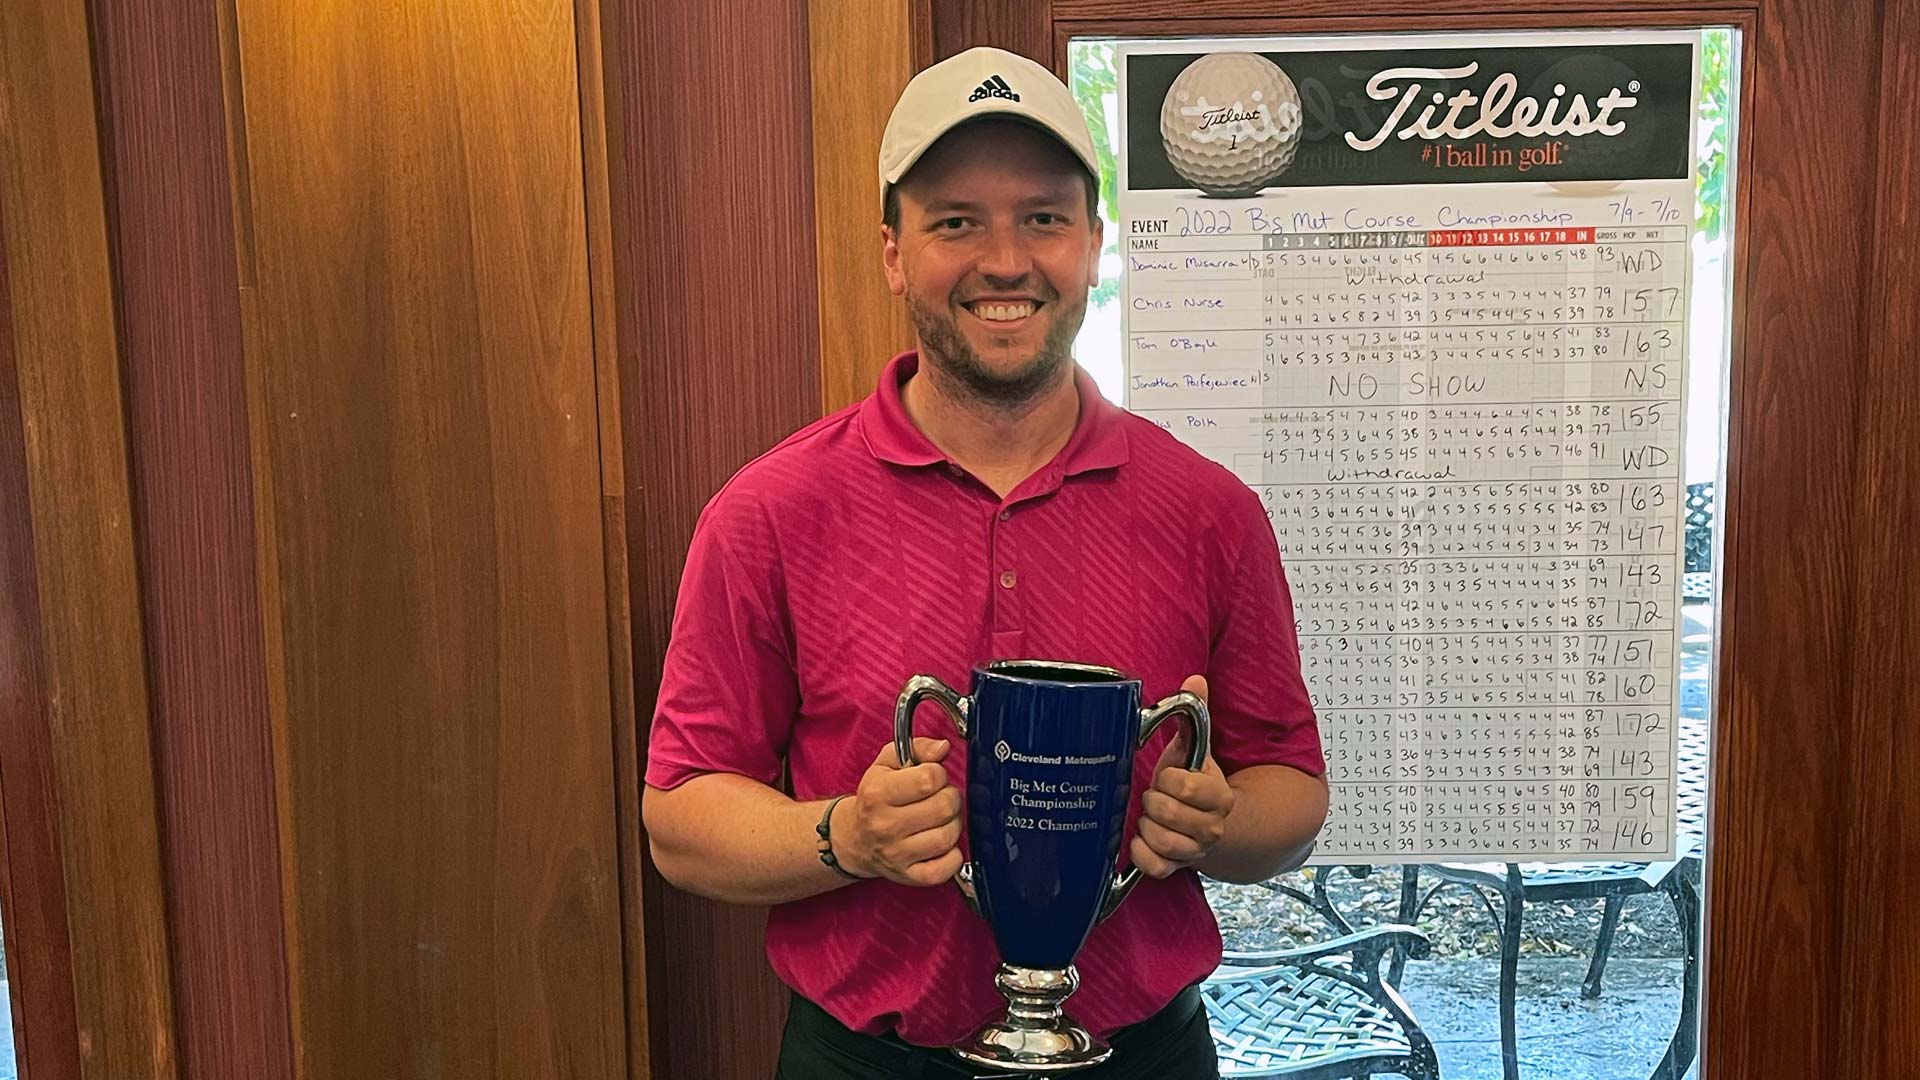 After-being-tied-at-1-under-par-143-after-36-holes-Jonathan-Reimer-won-in-a-playoff-to-earn-the-victory-at-the-2022-Big-Met-Course-Championship.jpg